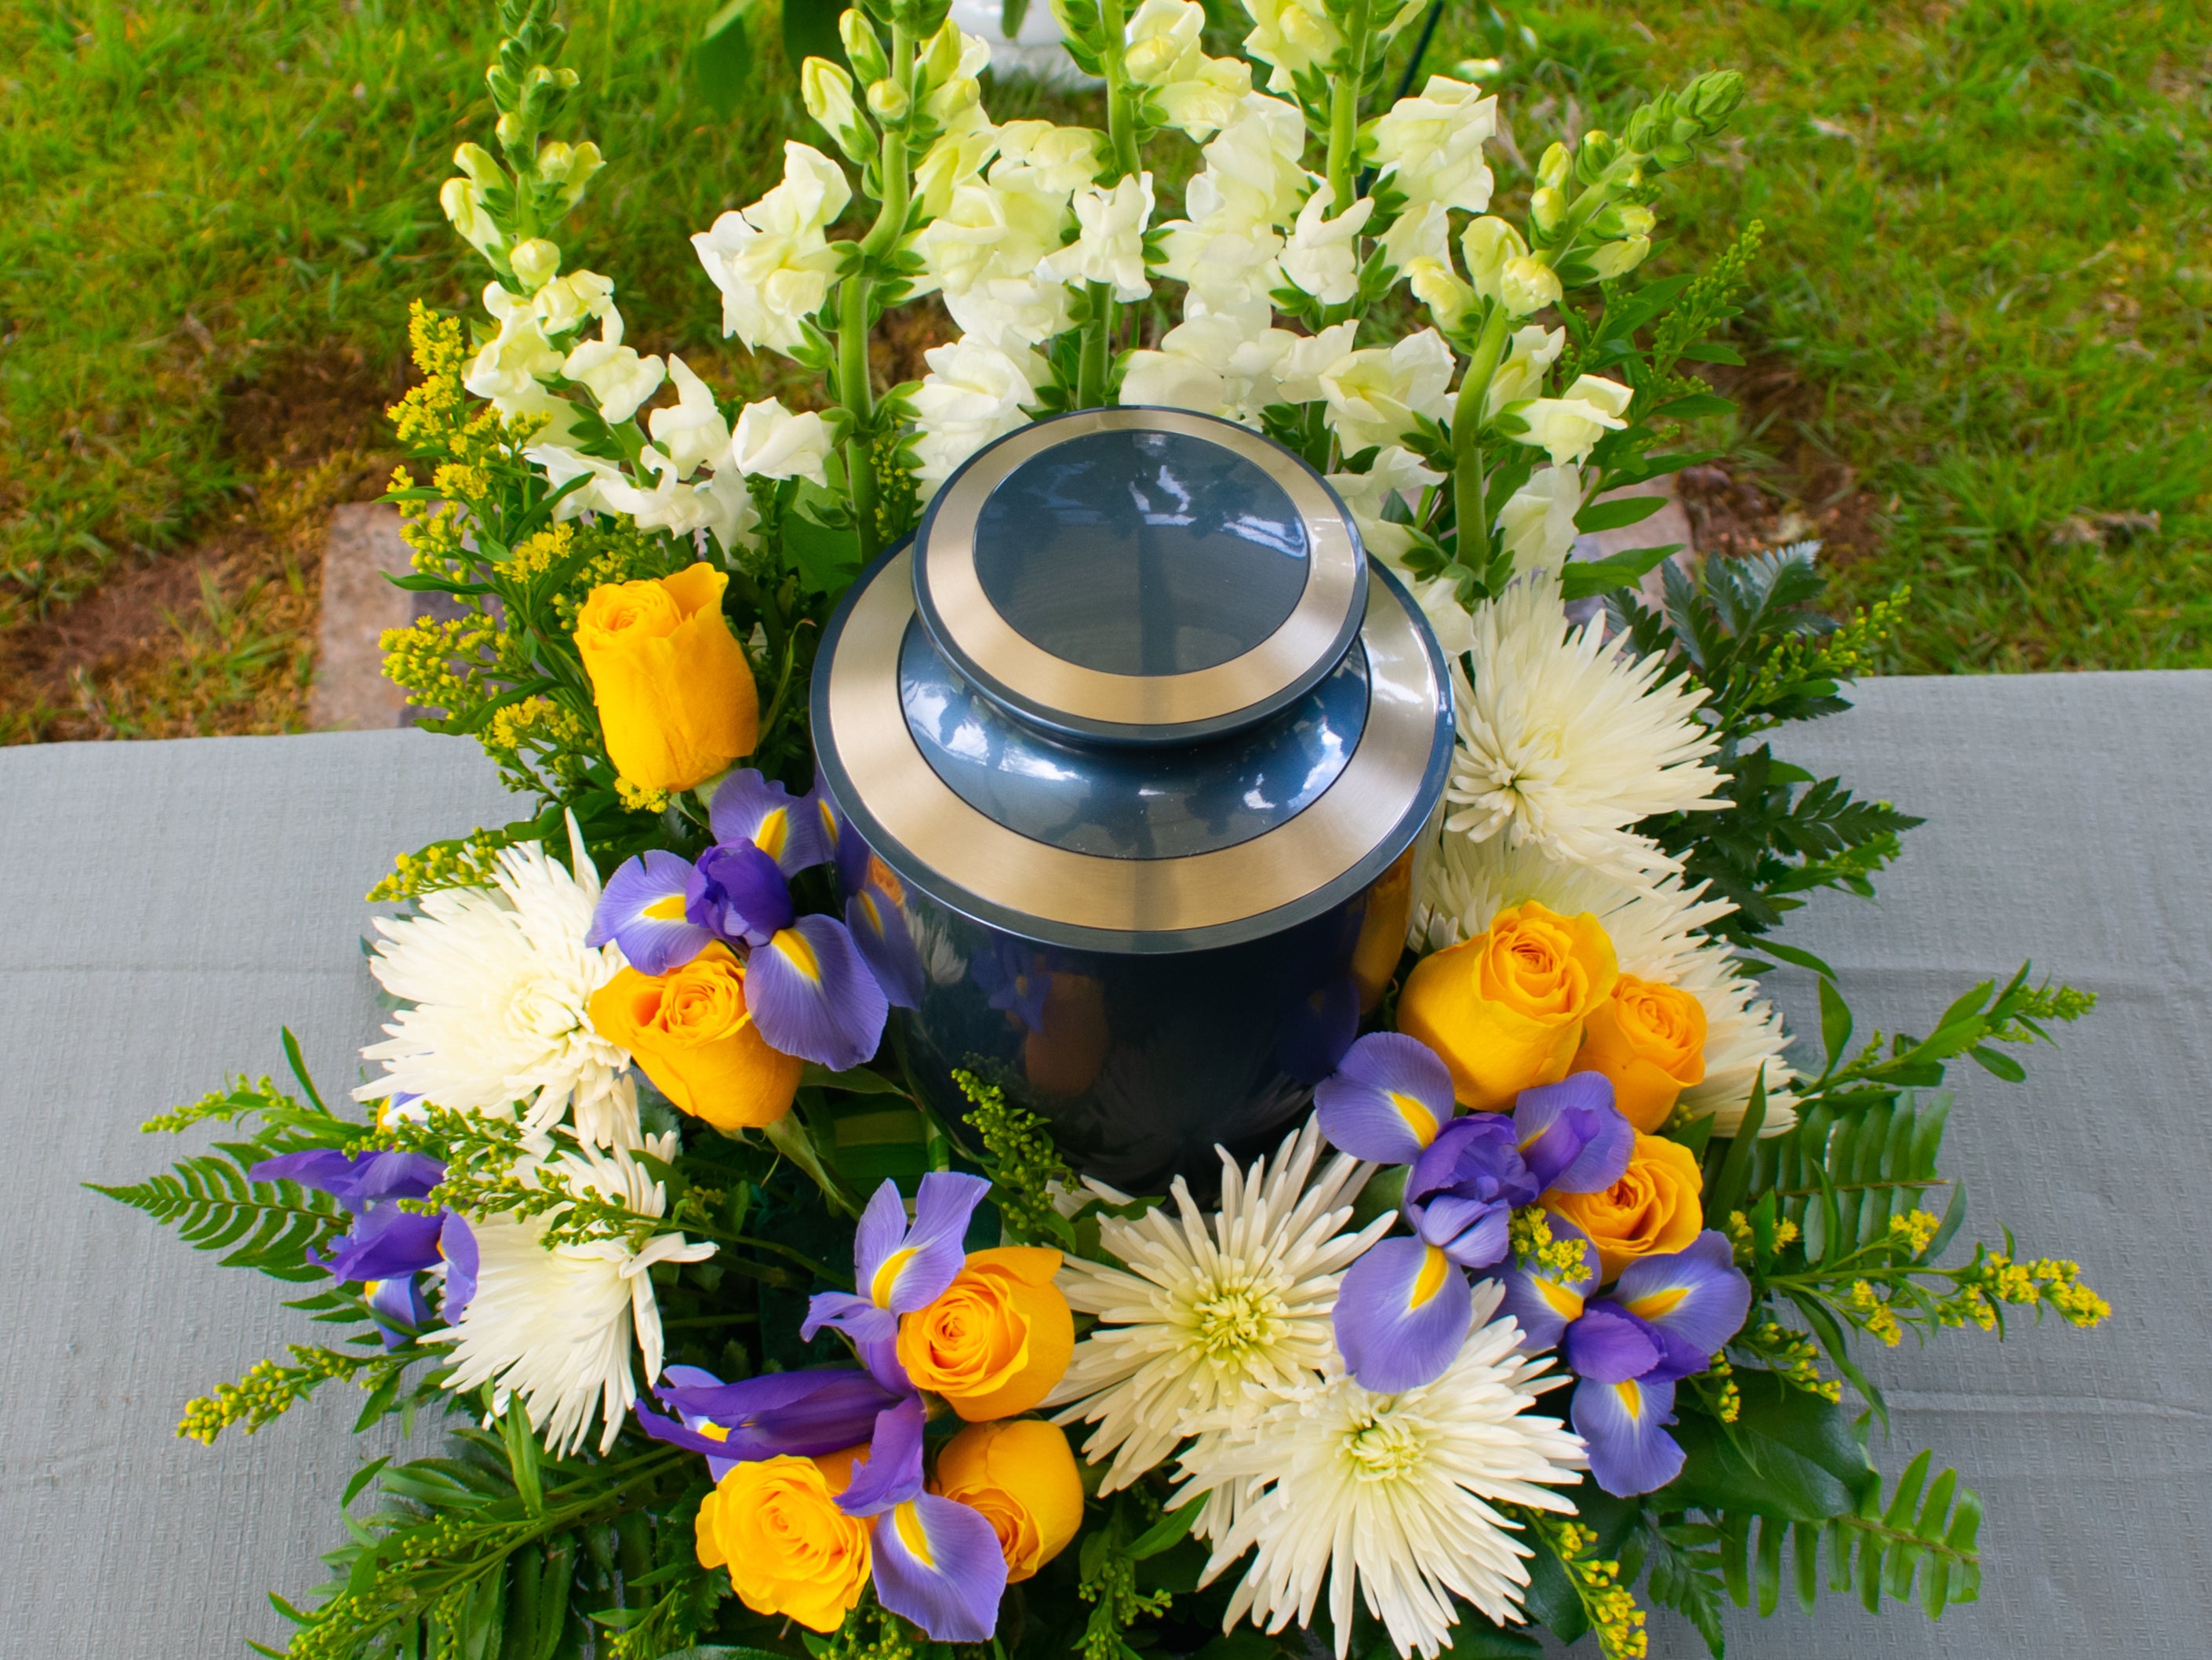 A cremation urn with floral arrangement at a funeral ceremony